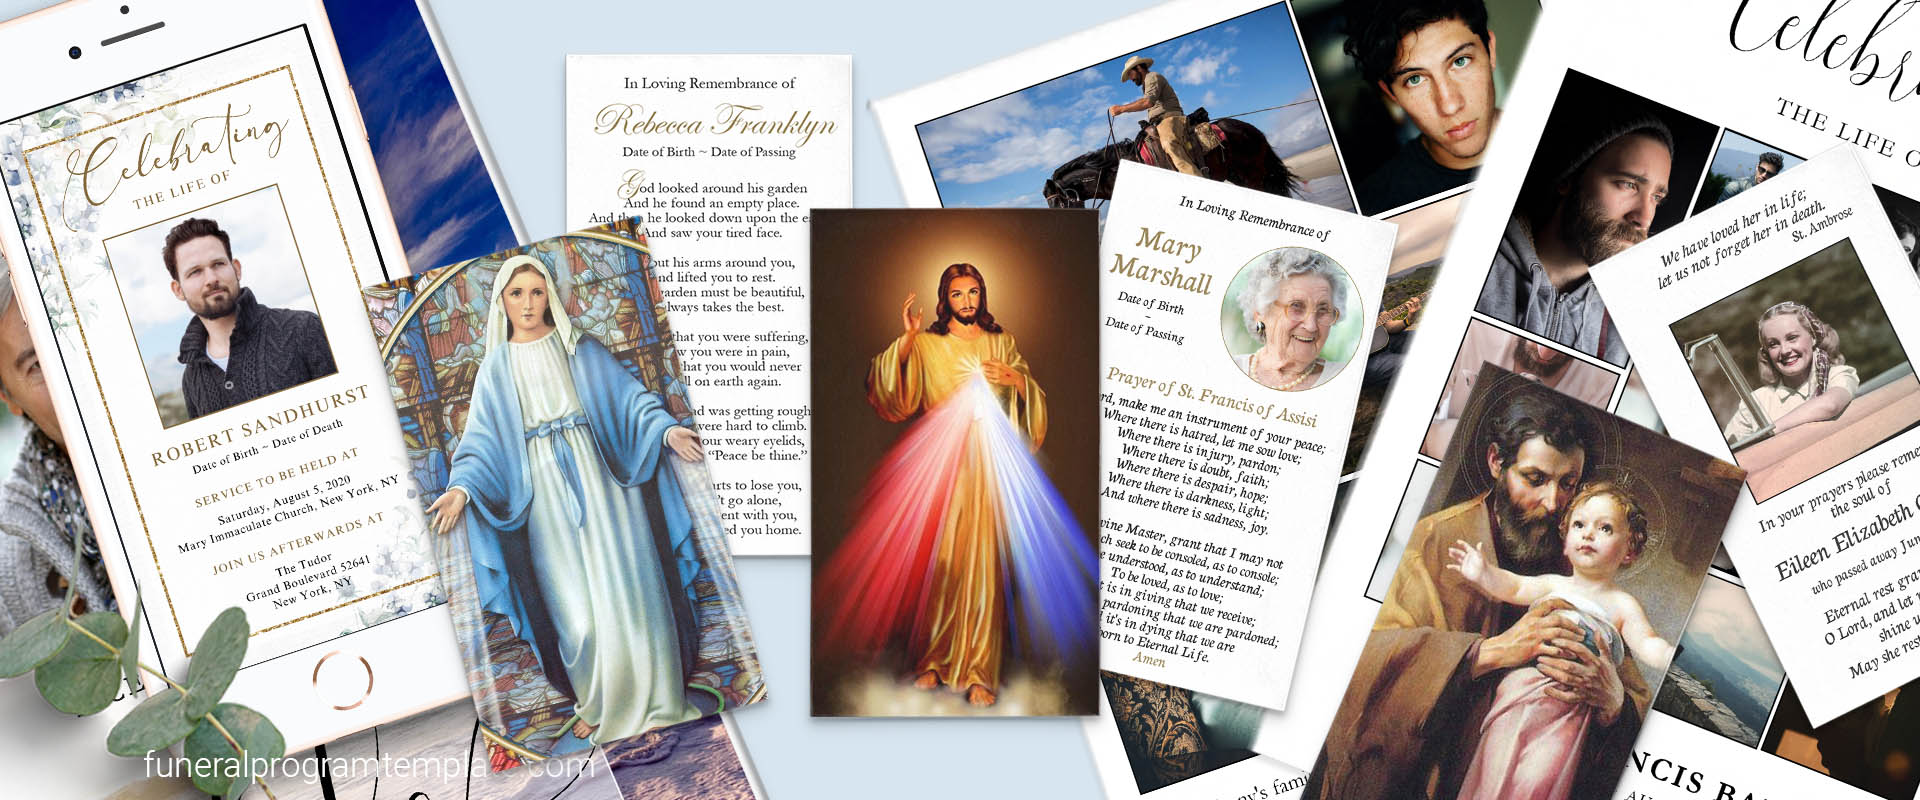 Prayer cards for a funeral